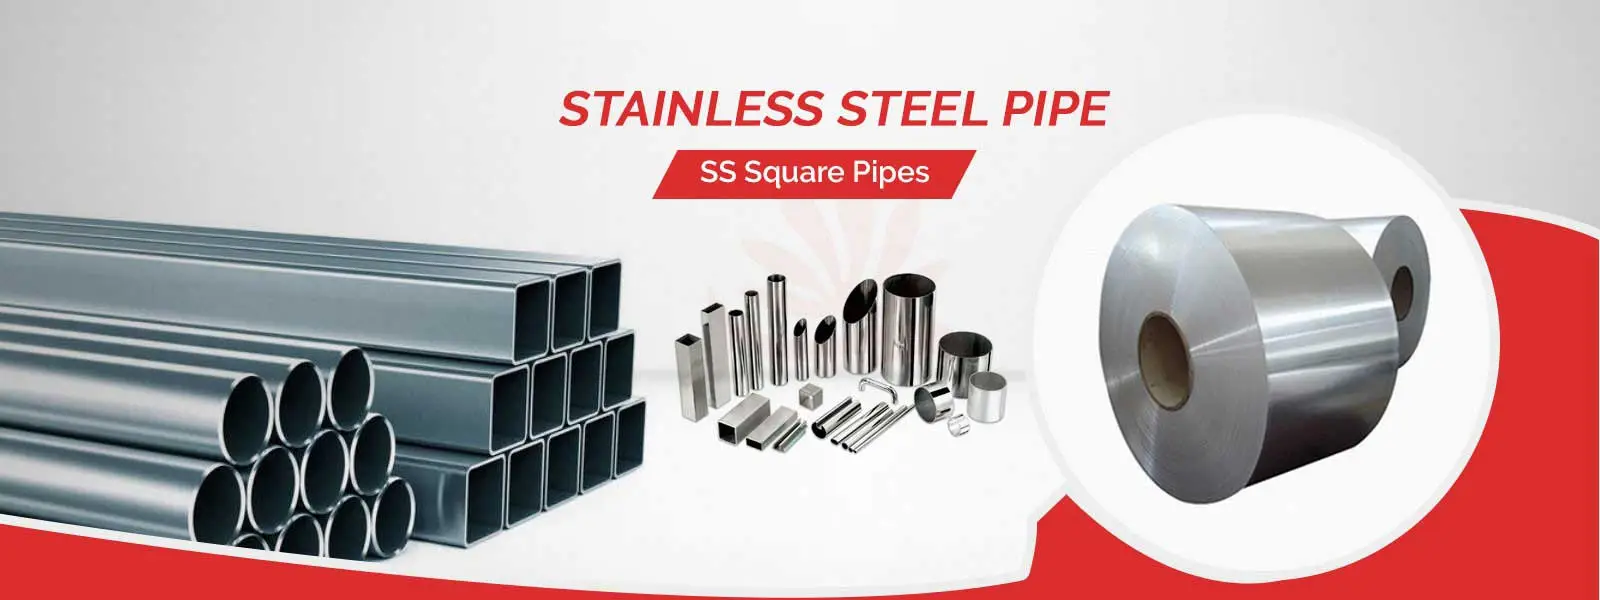 Stainless Steel Pipe Manufacturers in Gwalior